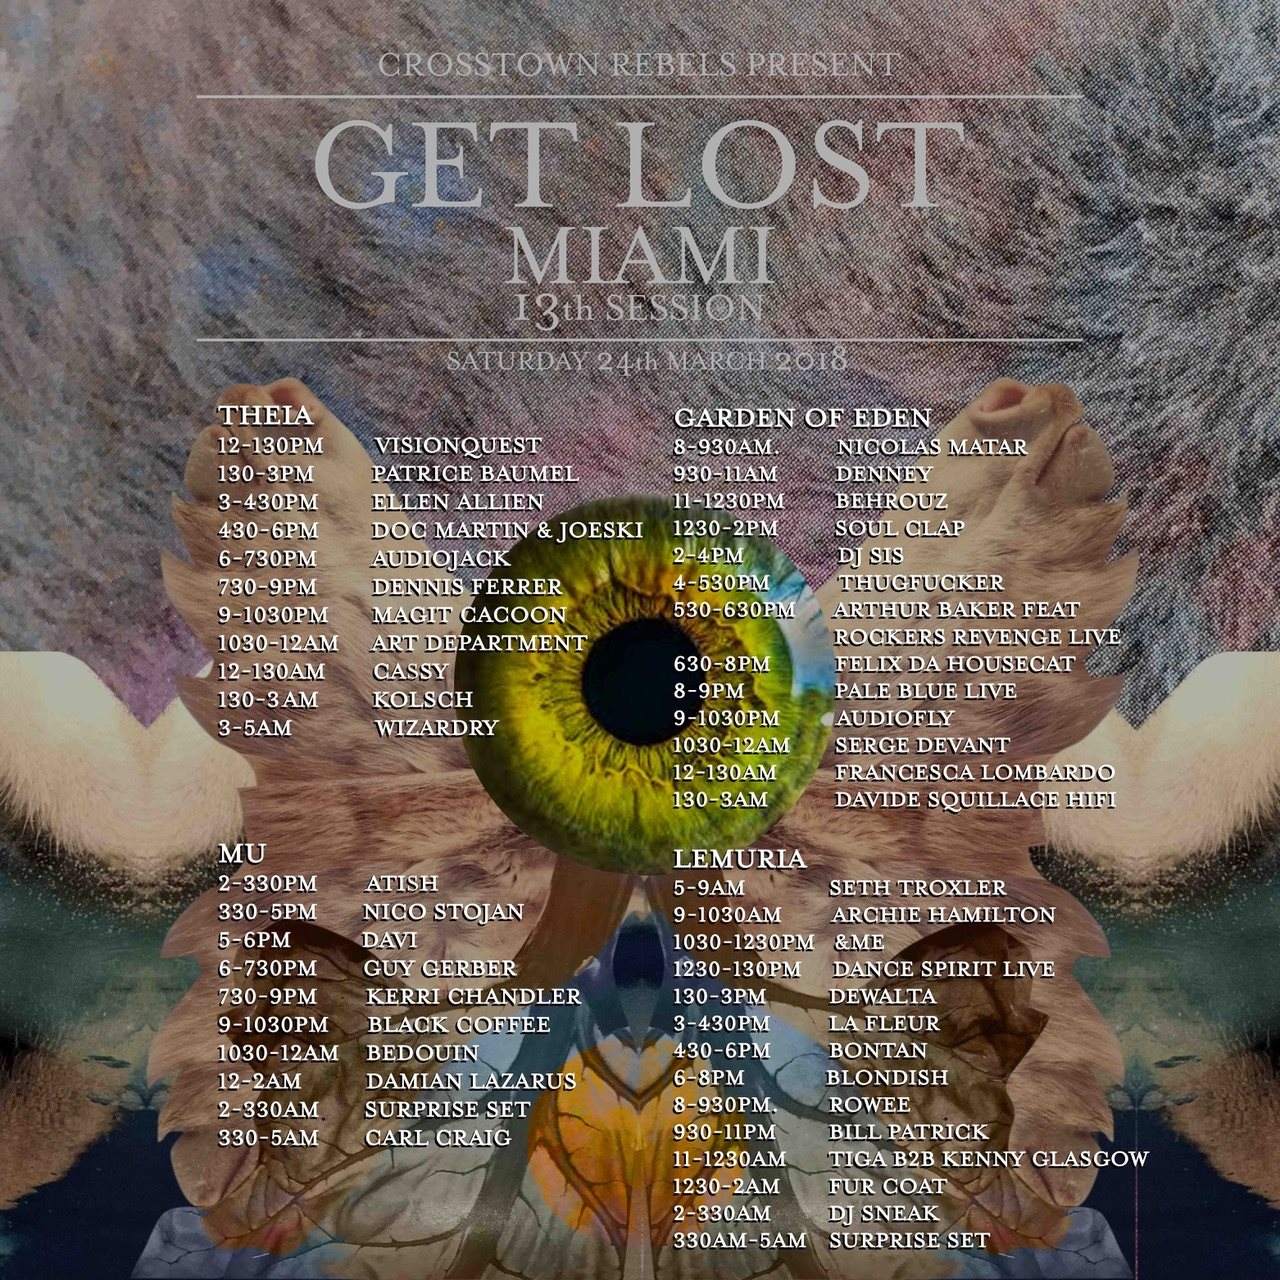 Crosstown Rebels present Get Lost Miami - 13th Session - Página frontal